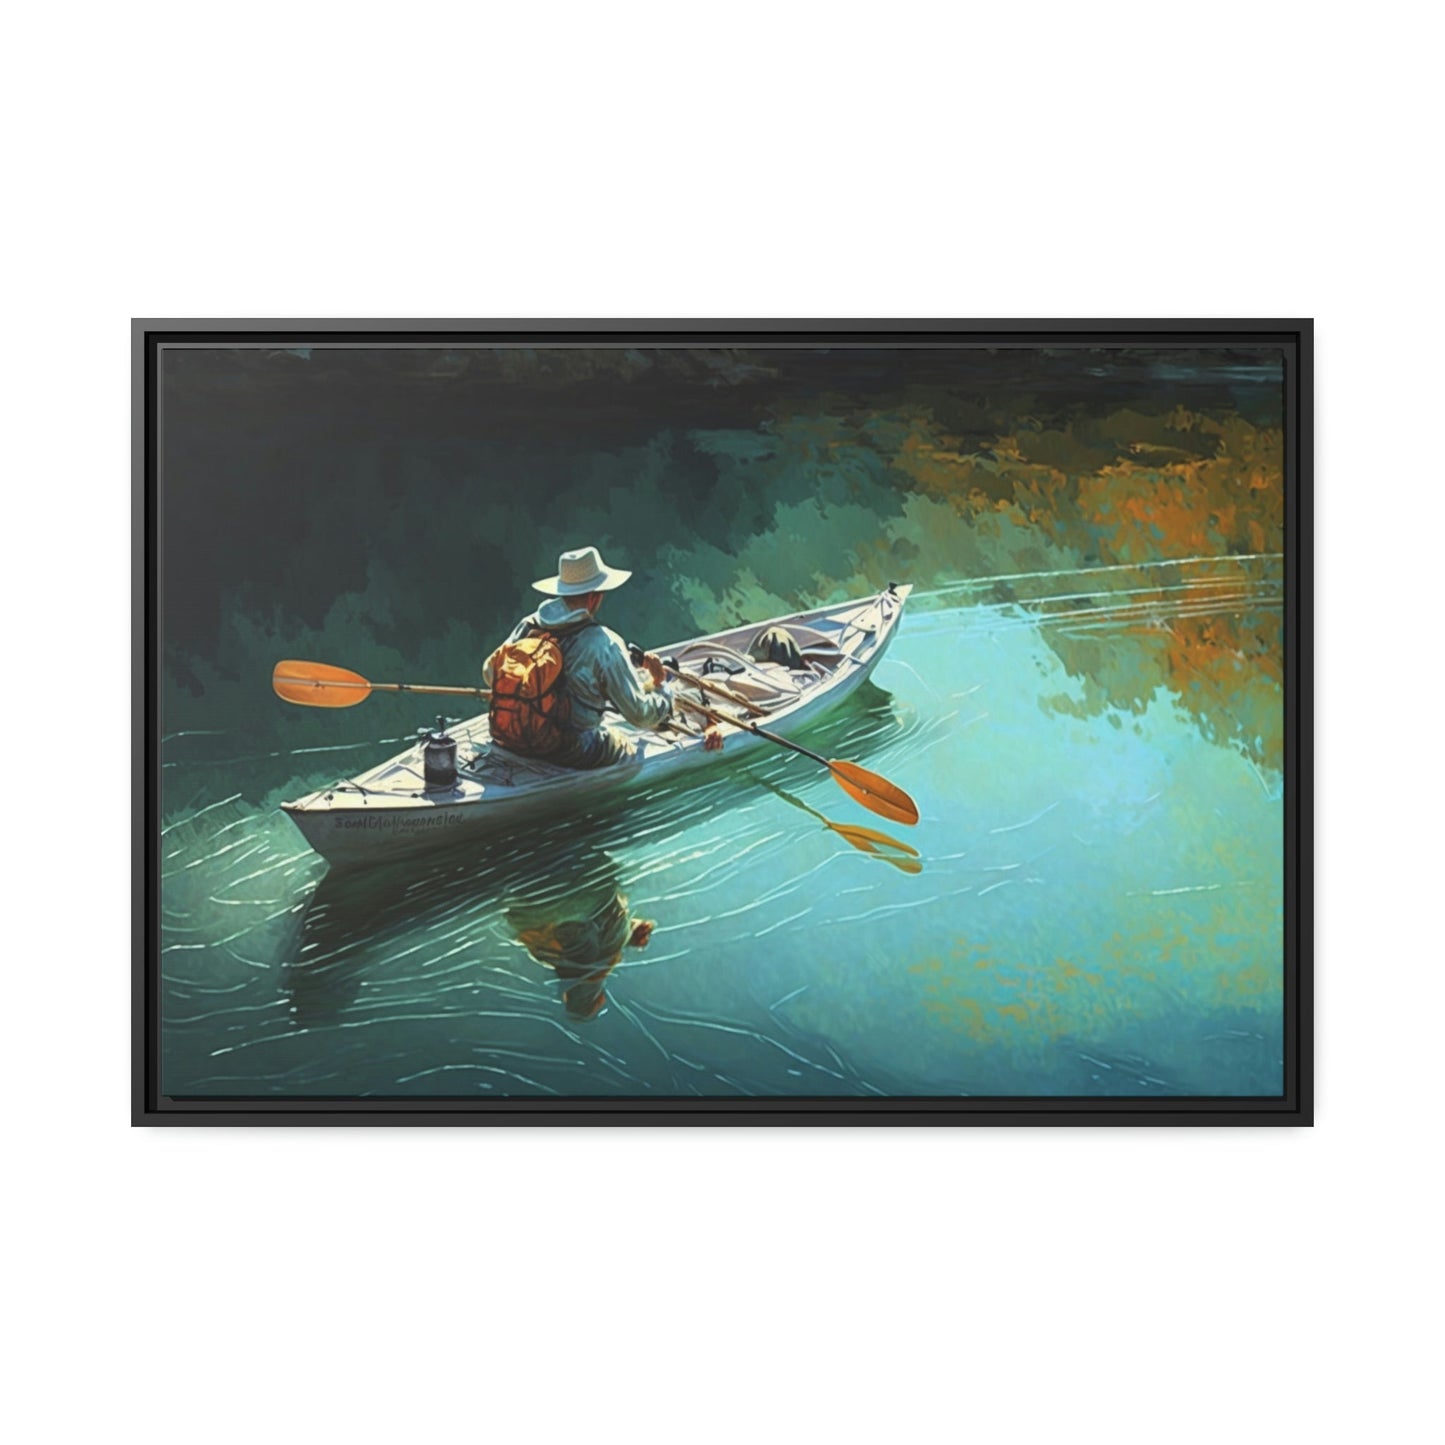 Boating Adventure: Framed Canvas and Print with Scenic Boating Art